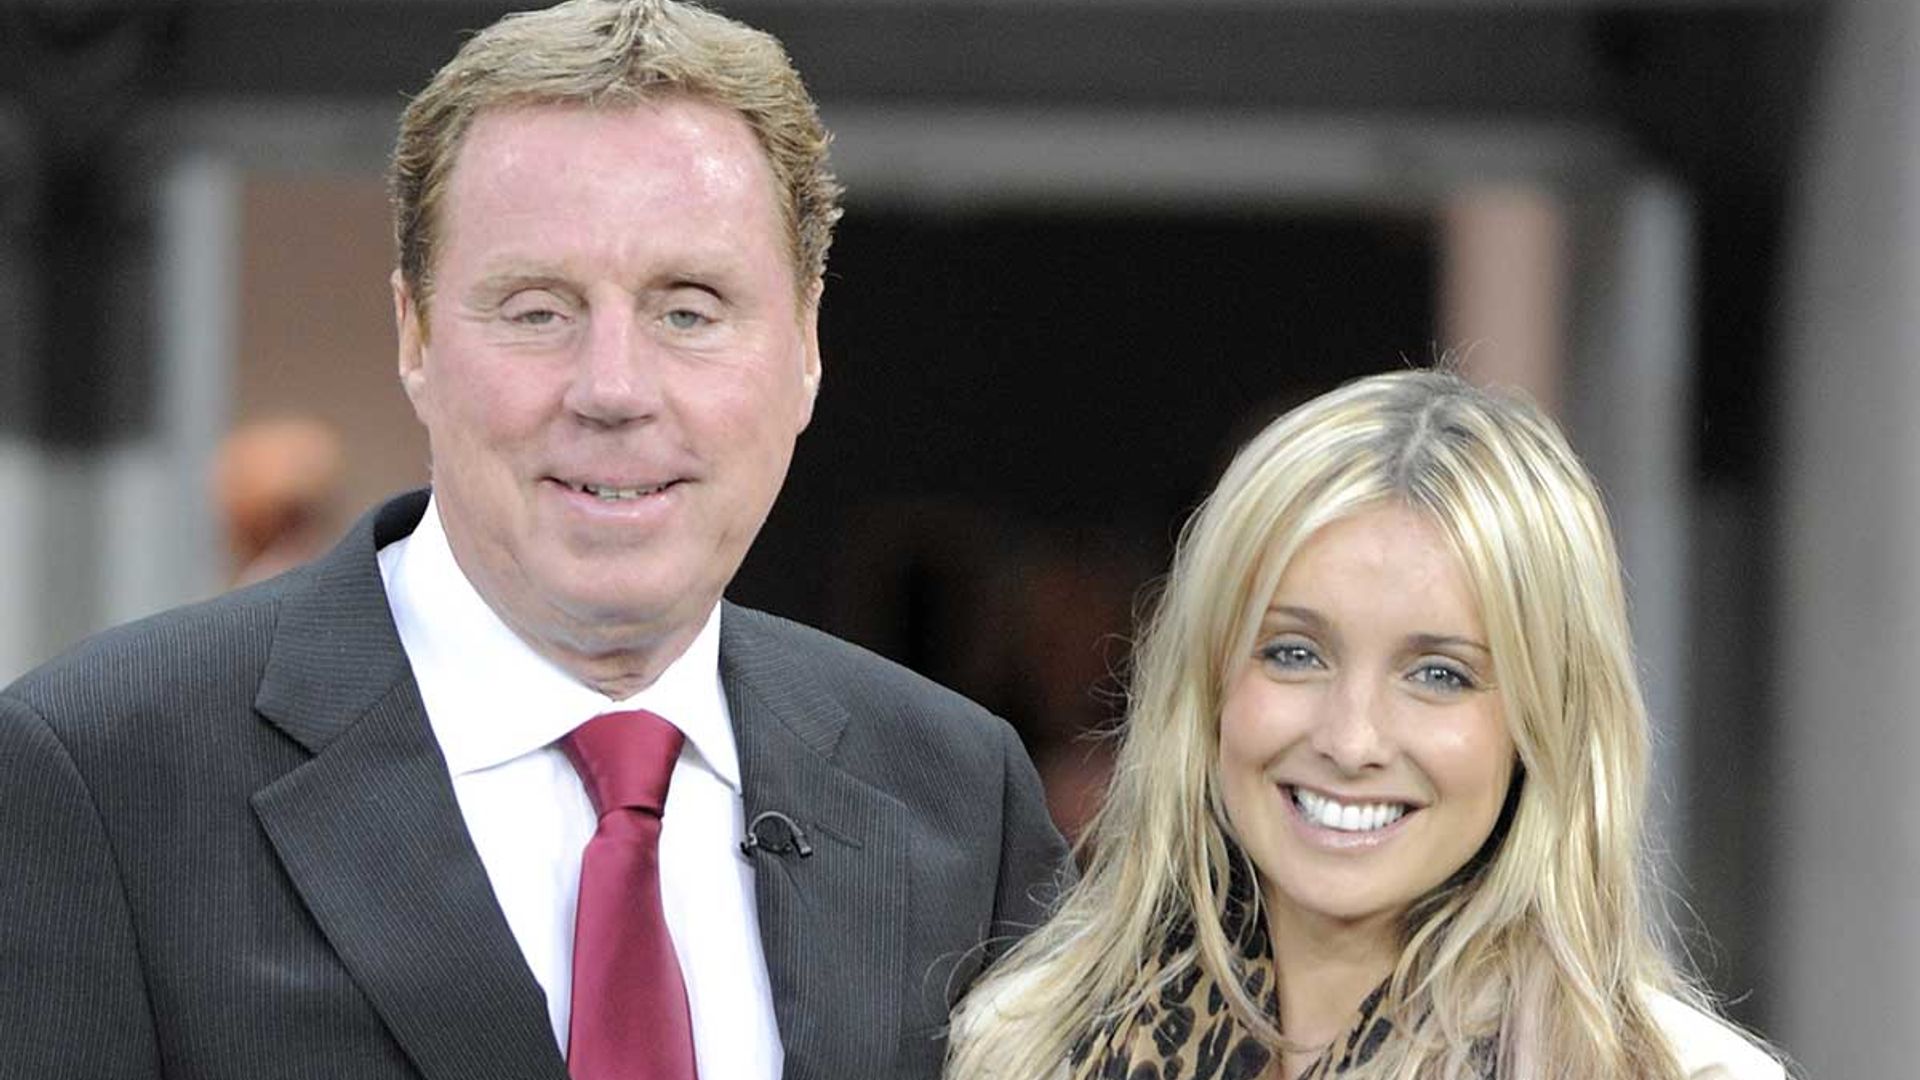 Exclusive: Harry Redknapp reveals why he won't see Louise Redknapp onstage